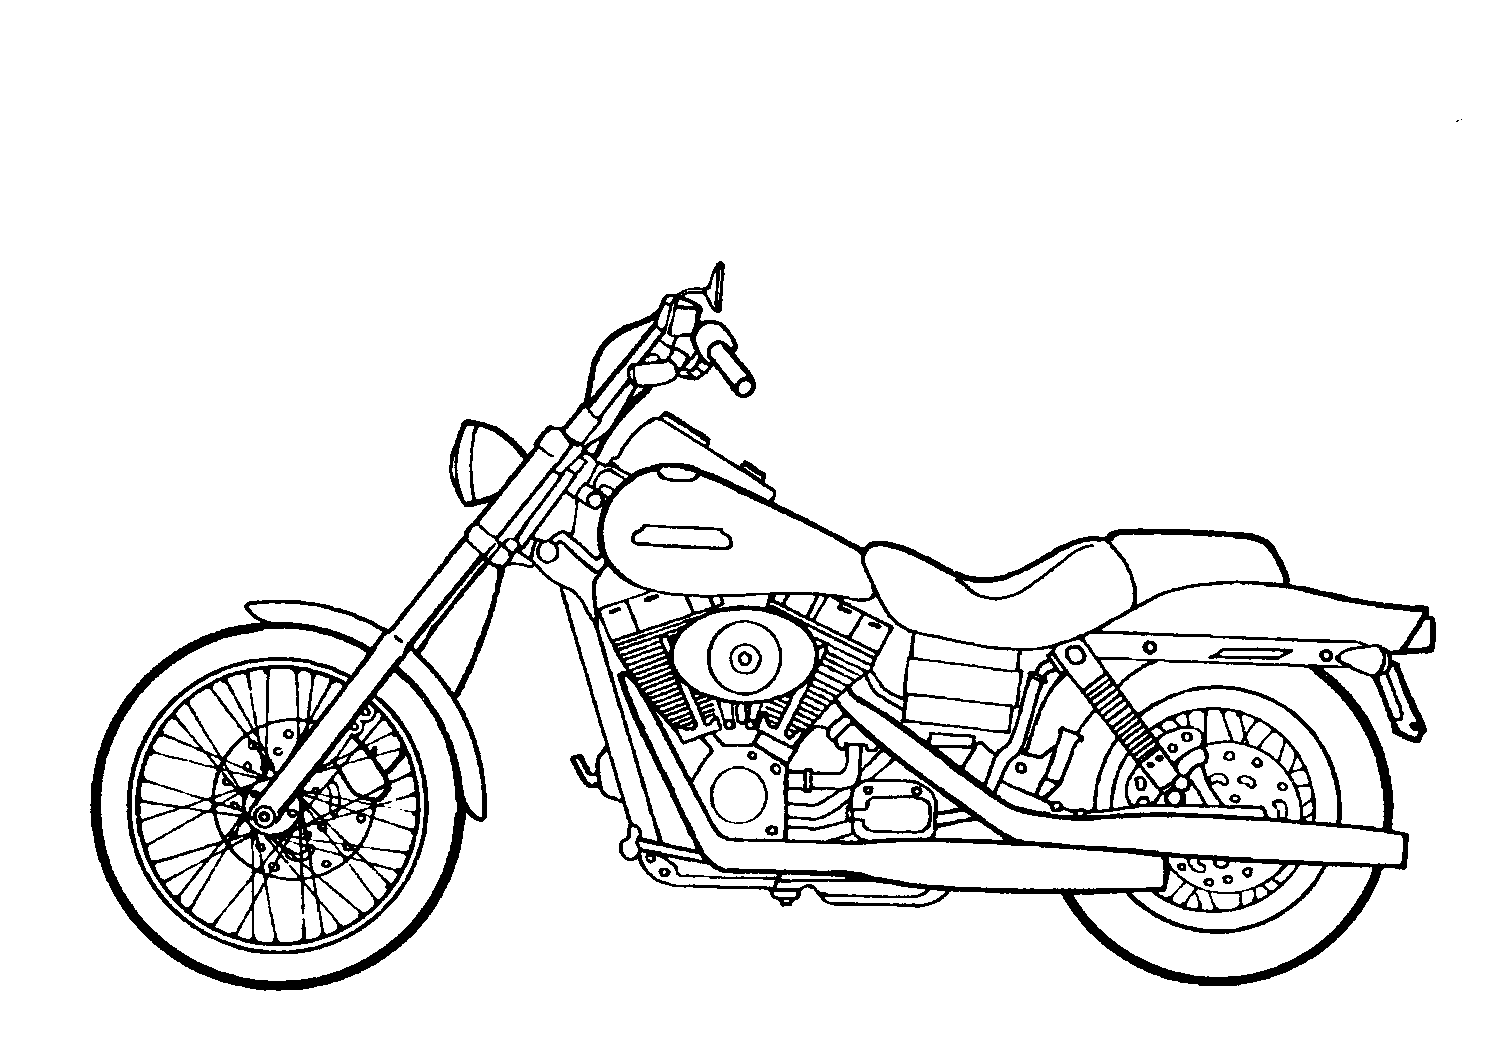 motorcycle coloring pages harley davidson dyna Coloring4free